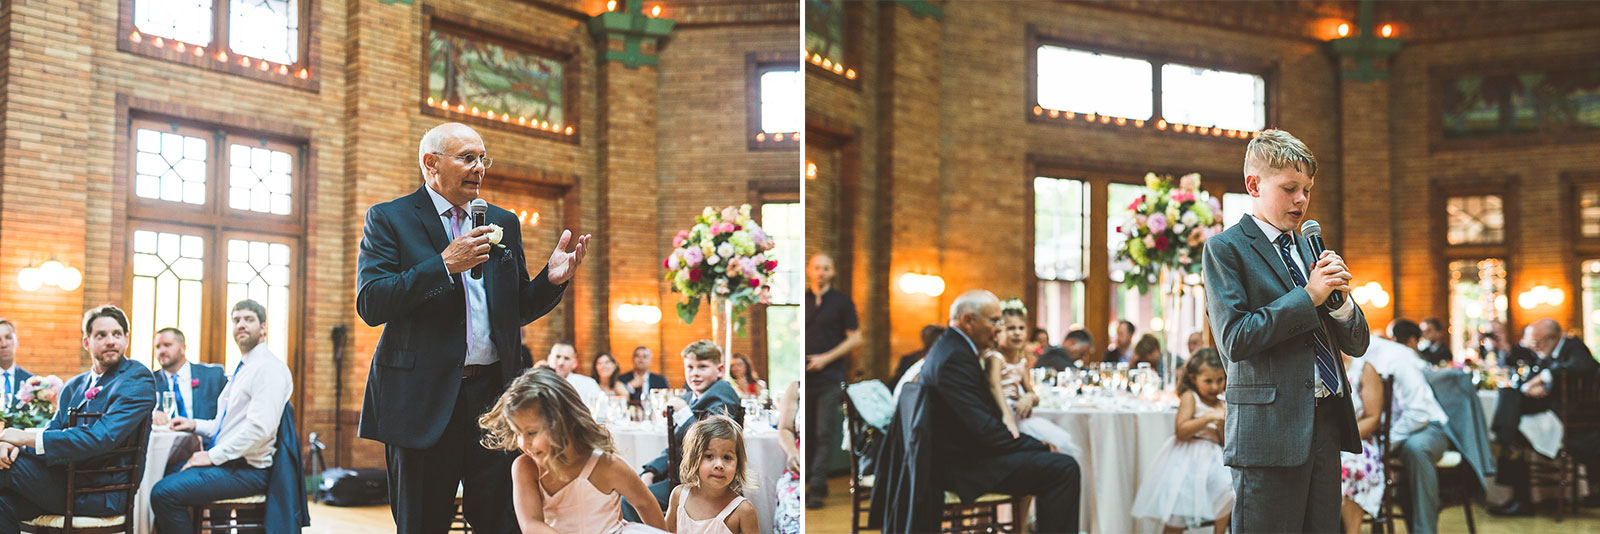 57-father-of-the-bride-speech-at-chicago-wedding